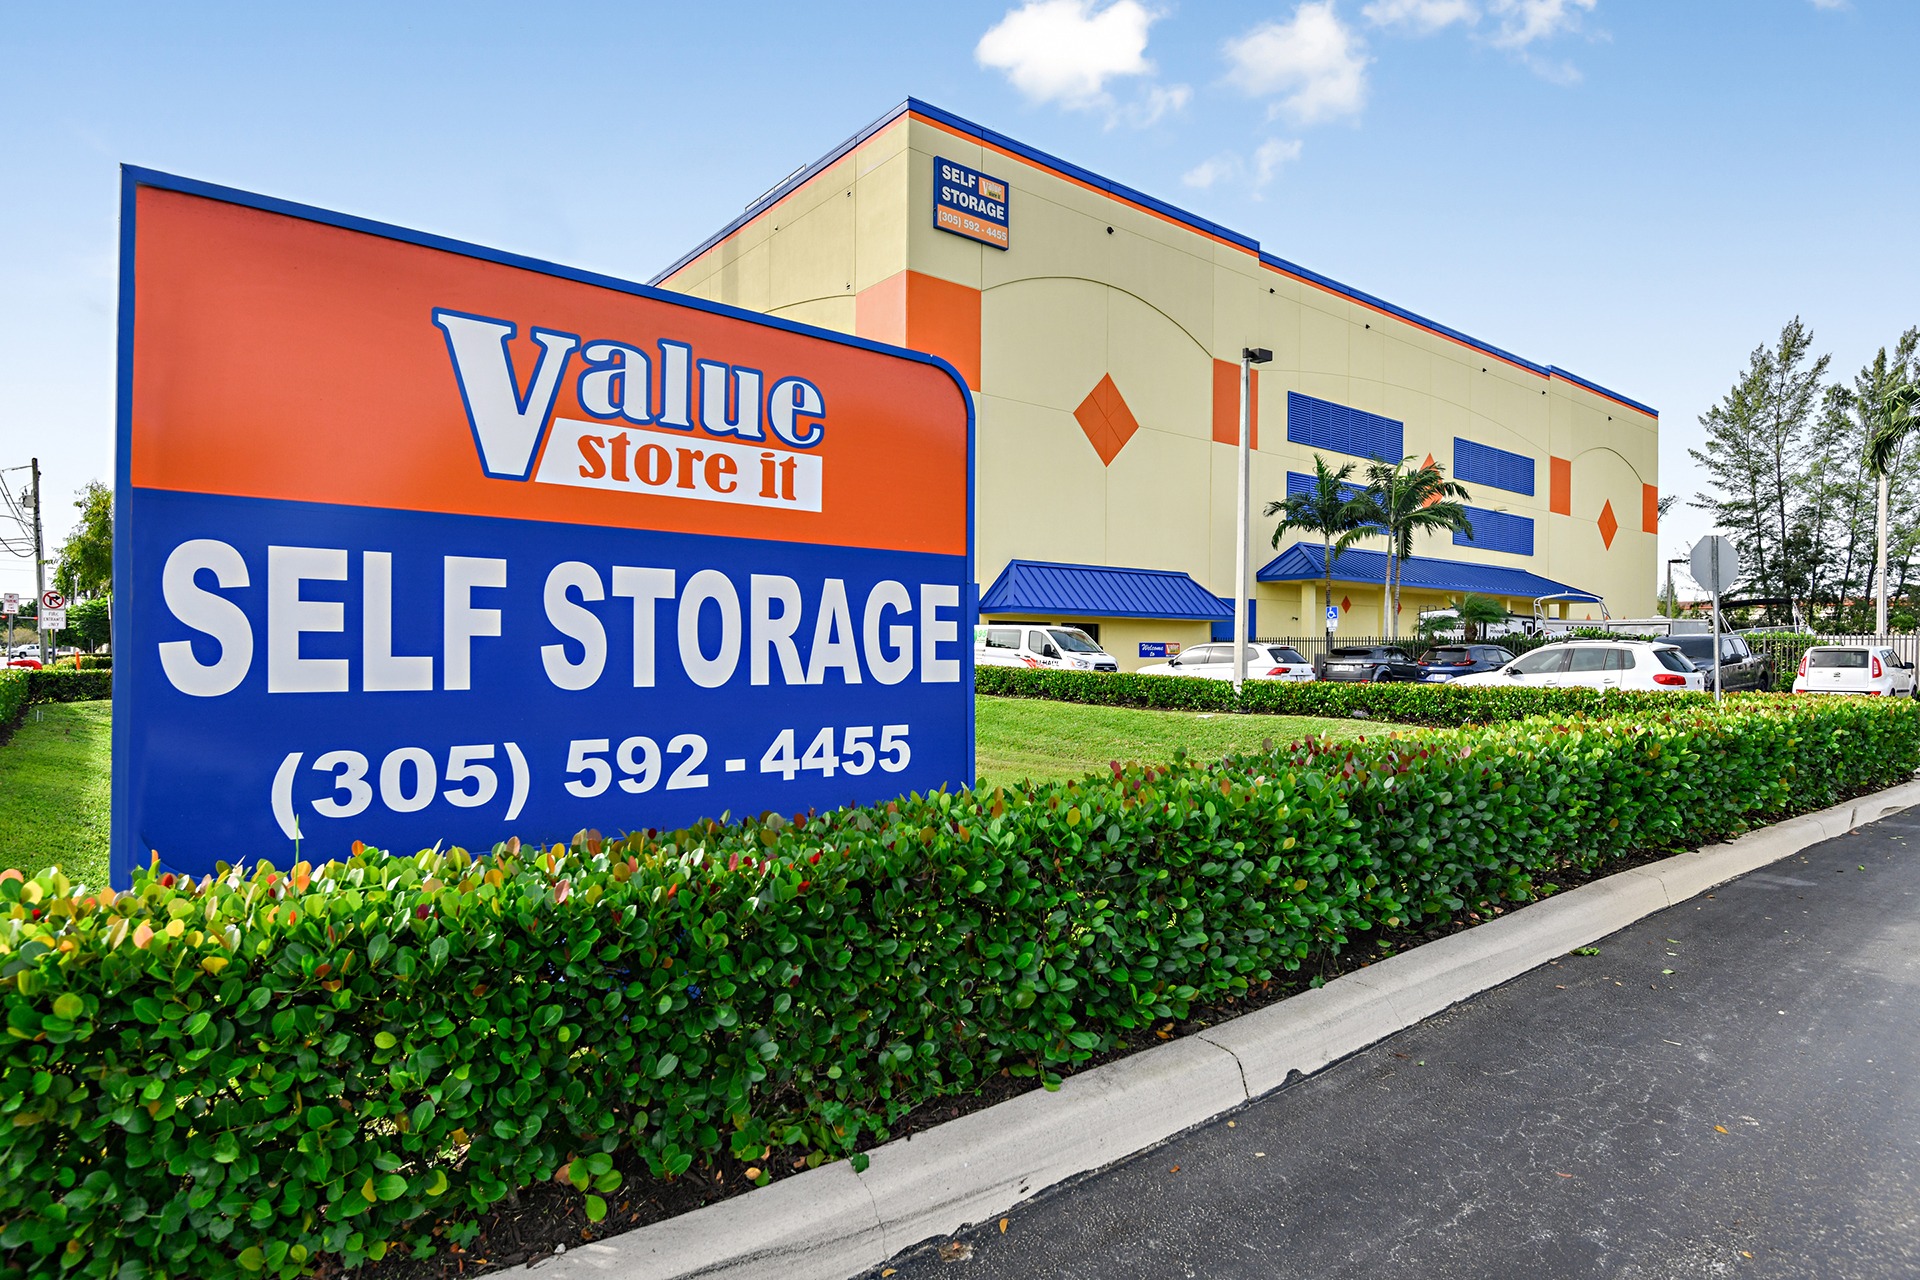 Value Store It - Doral at 5900 NW 102nd Ave